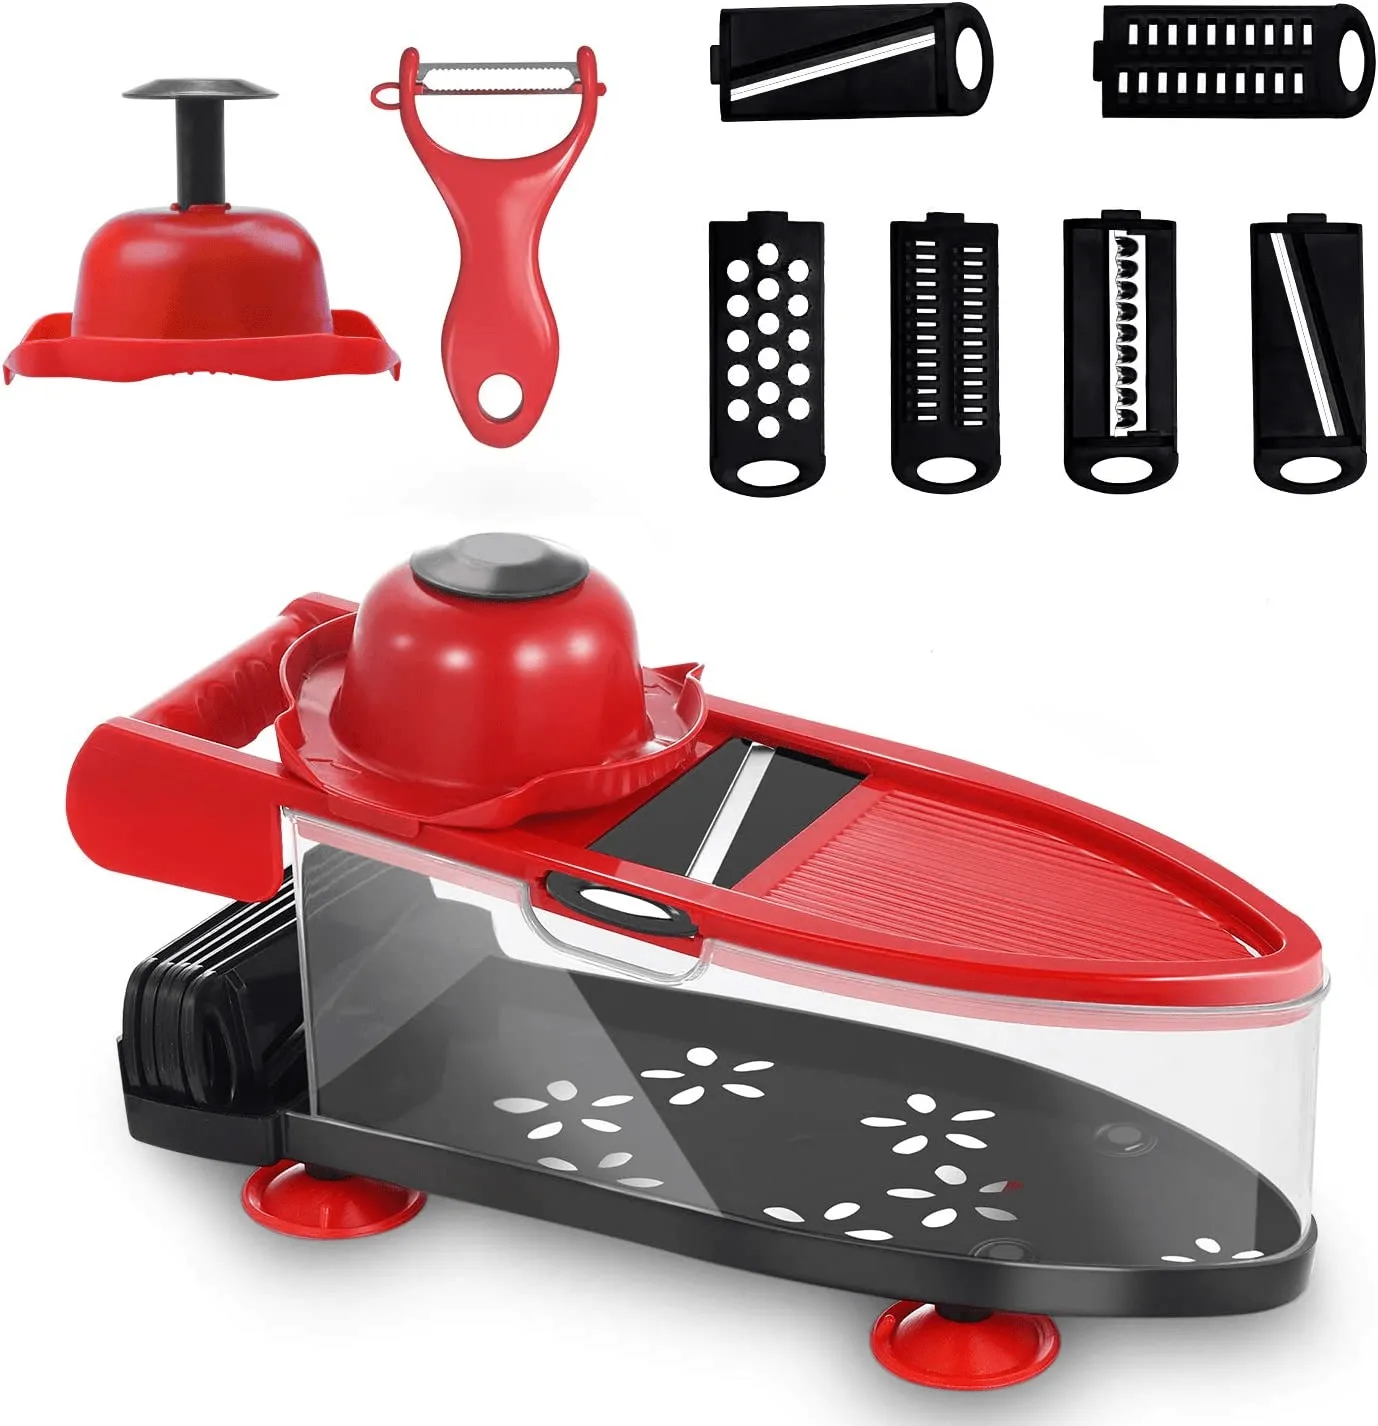 Vegetable Chopper, Slicer Dicer, Fruit and Cheese Cutter